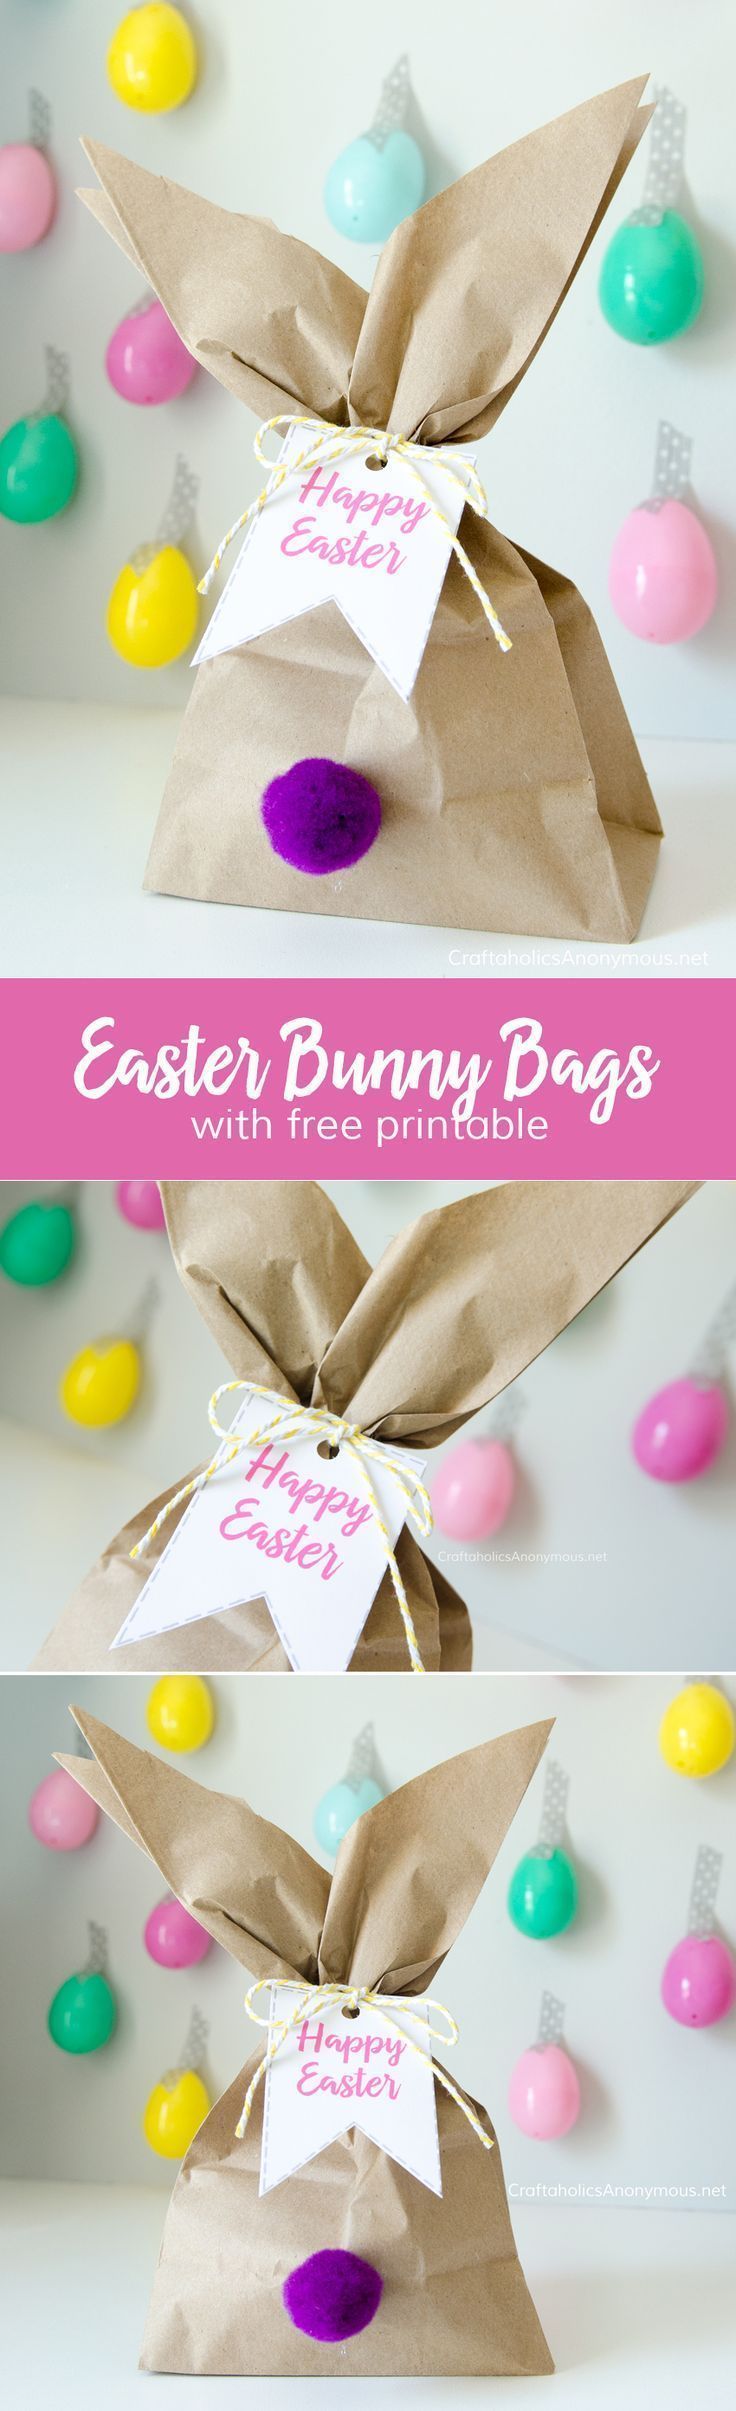 Easy Easter Bunny Gift Bags idea || Make great favors, gifts, decor, etc. Love t...